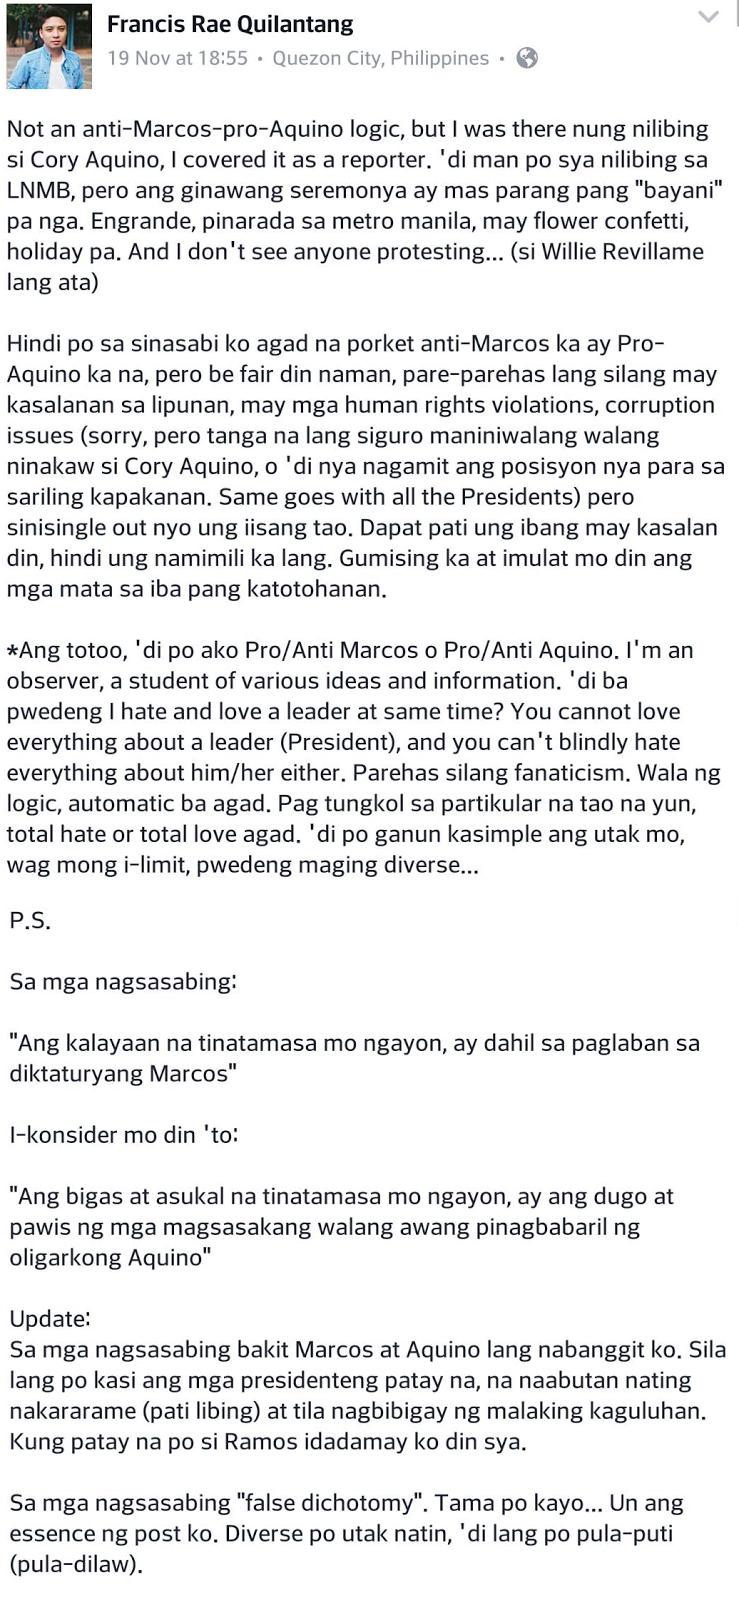 FEU professor claims Marcos burial not for heroes, Cory's was, and she didn't deserve it